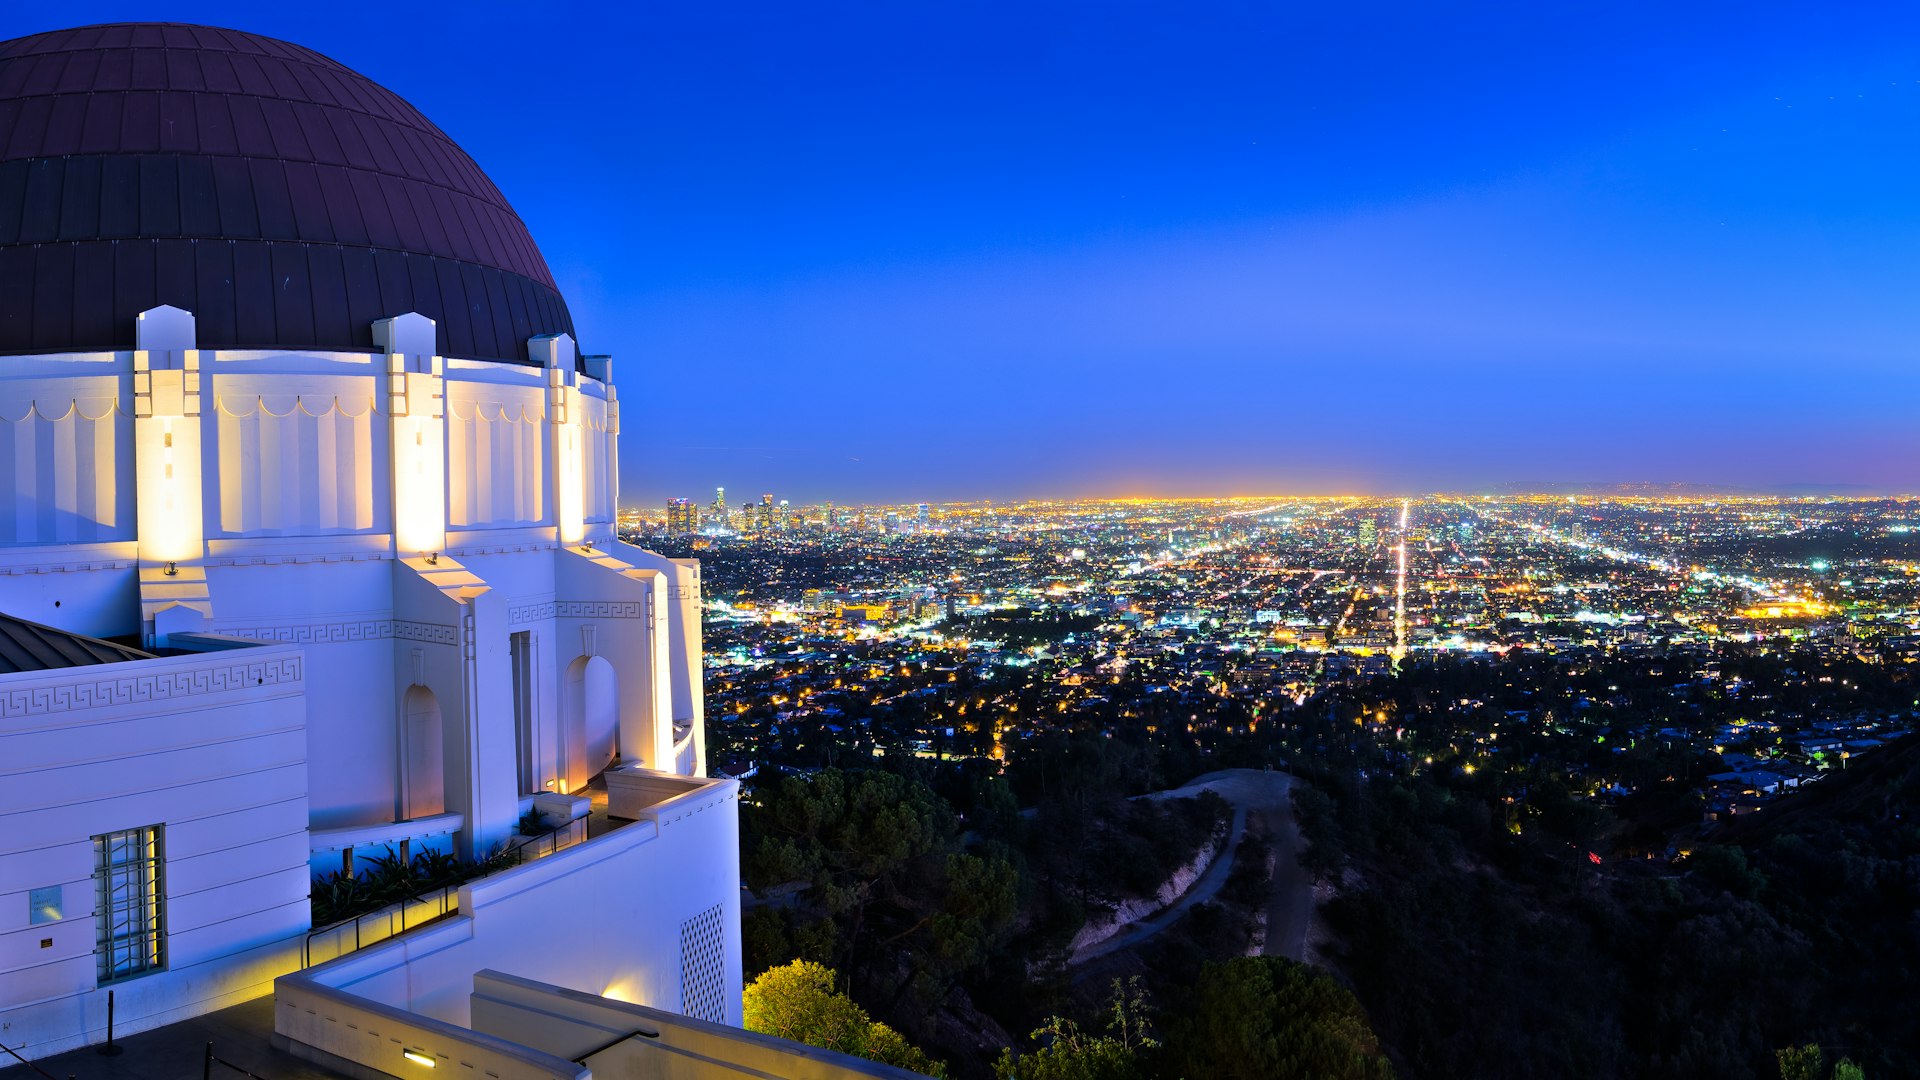 City Of Los Angeles Illuminated Griffith Park Observatory 